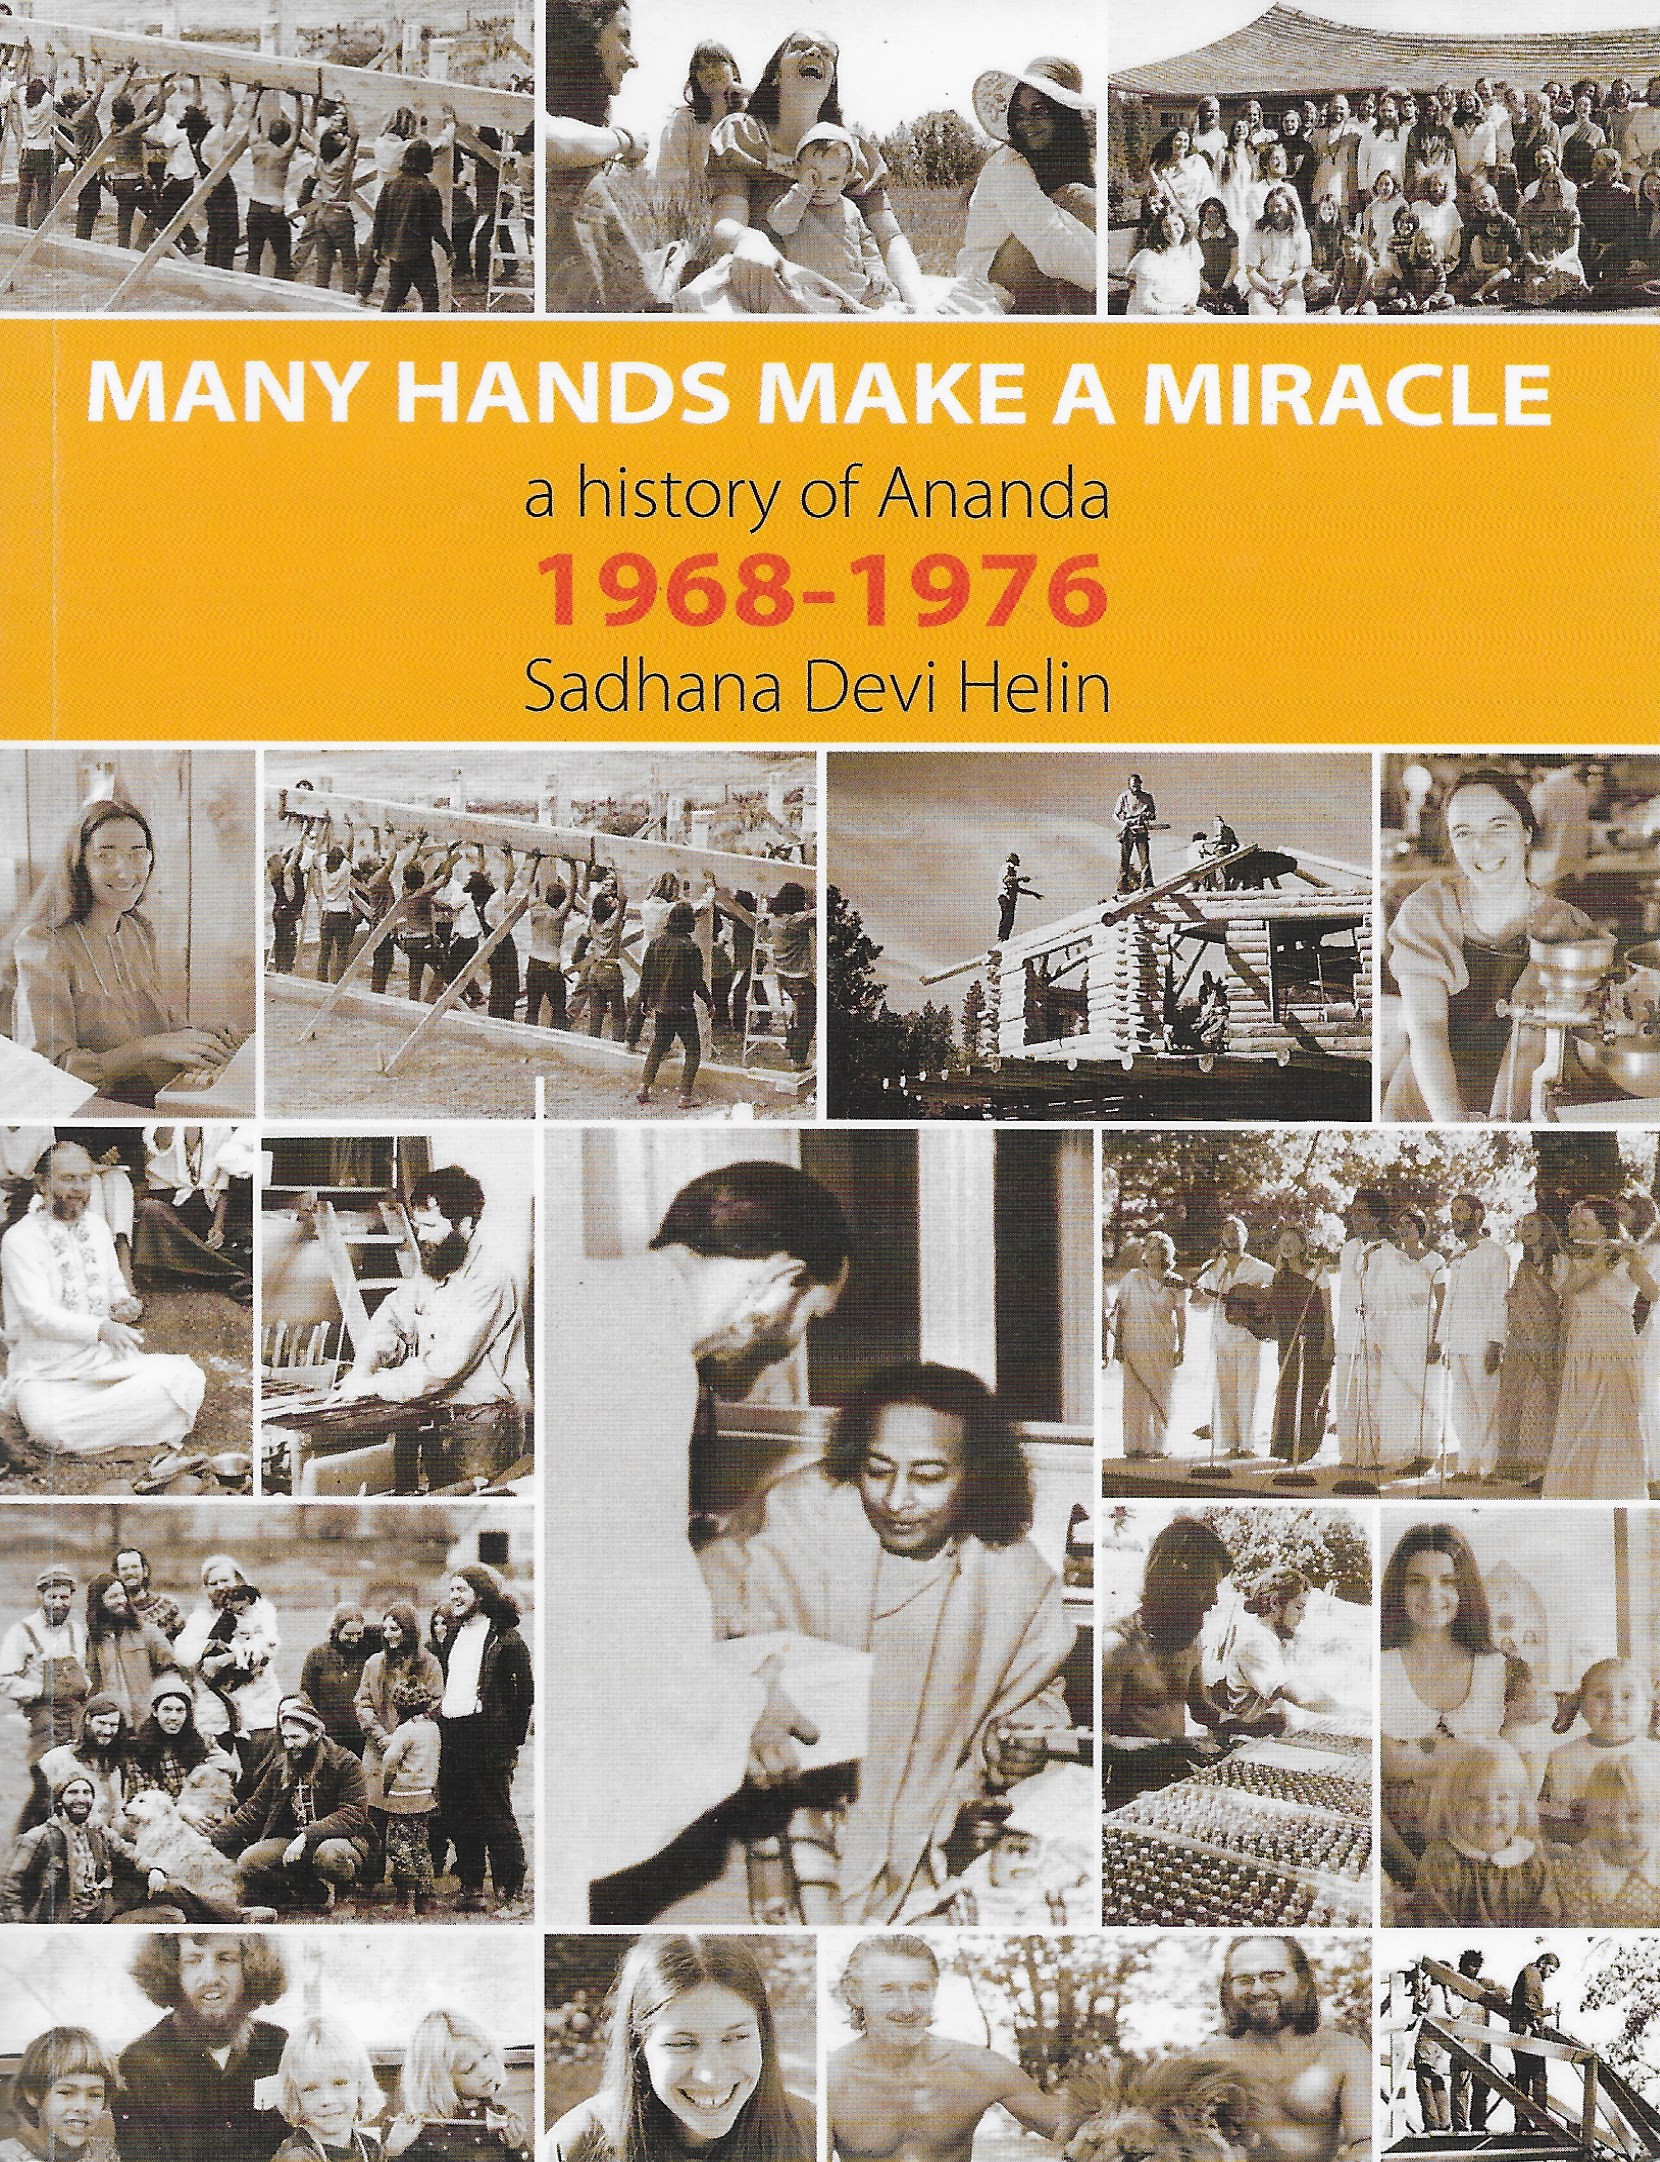 Read Many Hands Make a Miracle